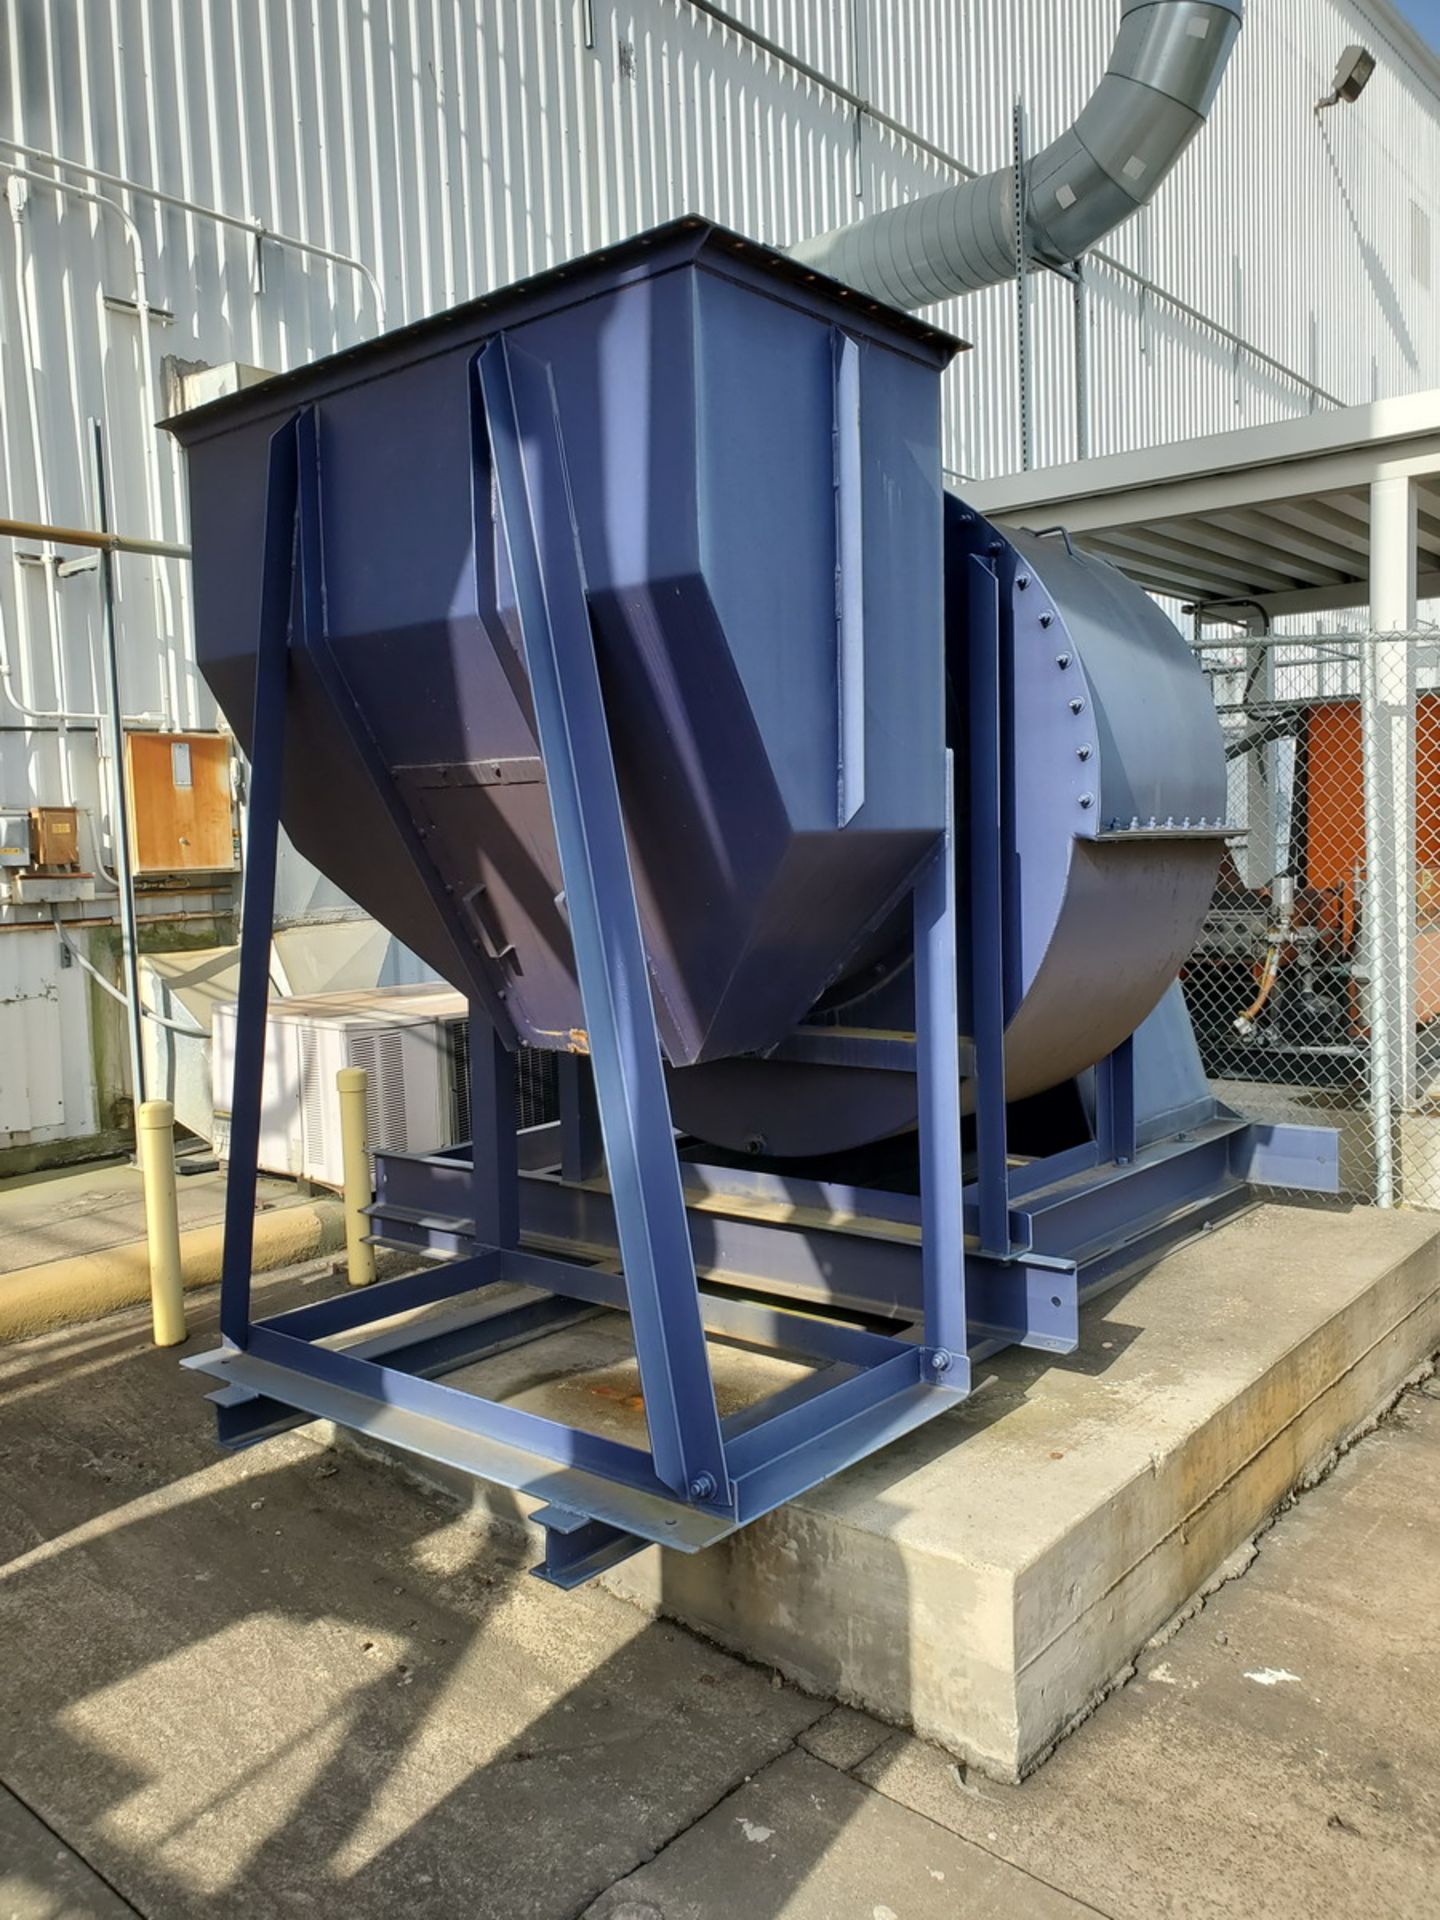 Donaldson Torit Dust Collector Mdl: RF276-10, 100HP, 230-460V, 3PH, 60HZ; W/ Tower, W/ Housing - Image 5 of 15